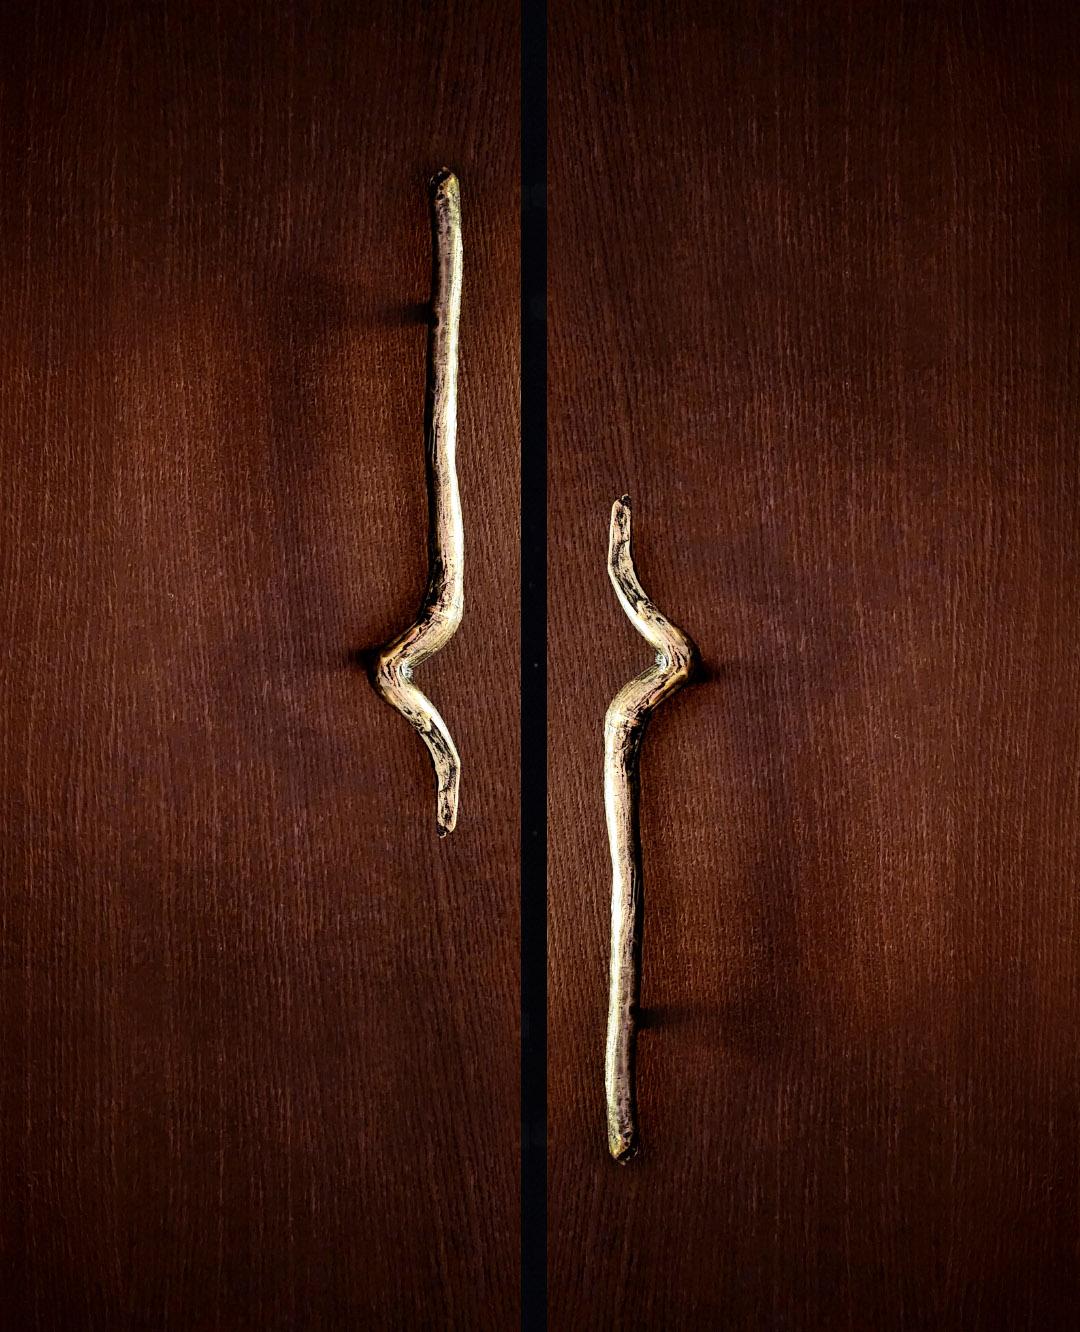 A tribute to nature, infinite source of patterns. Solid brass door handle made in our workshops.
Hand made organic patterns.
Different finishes available on demand.